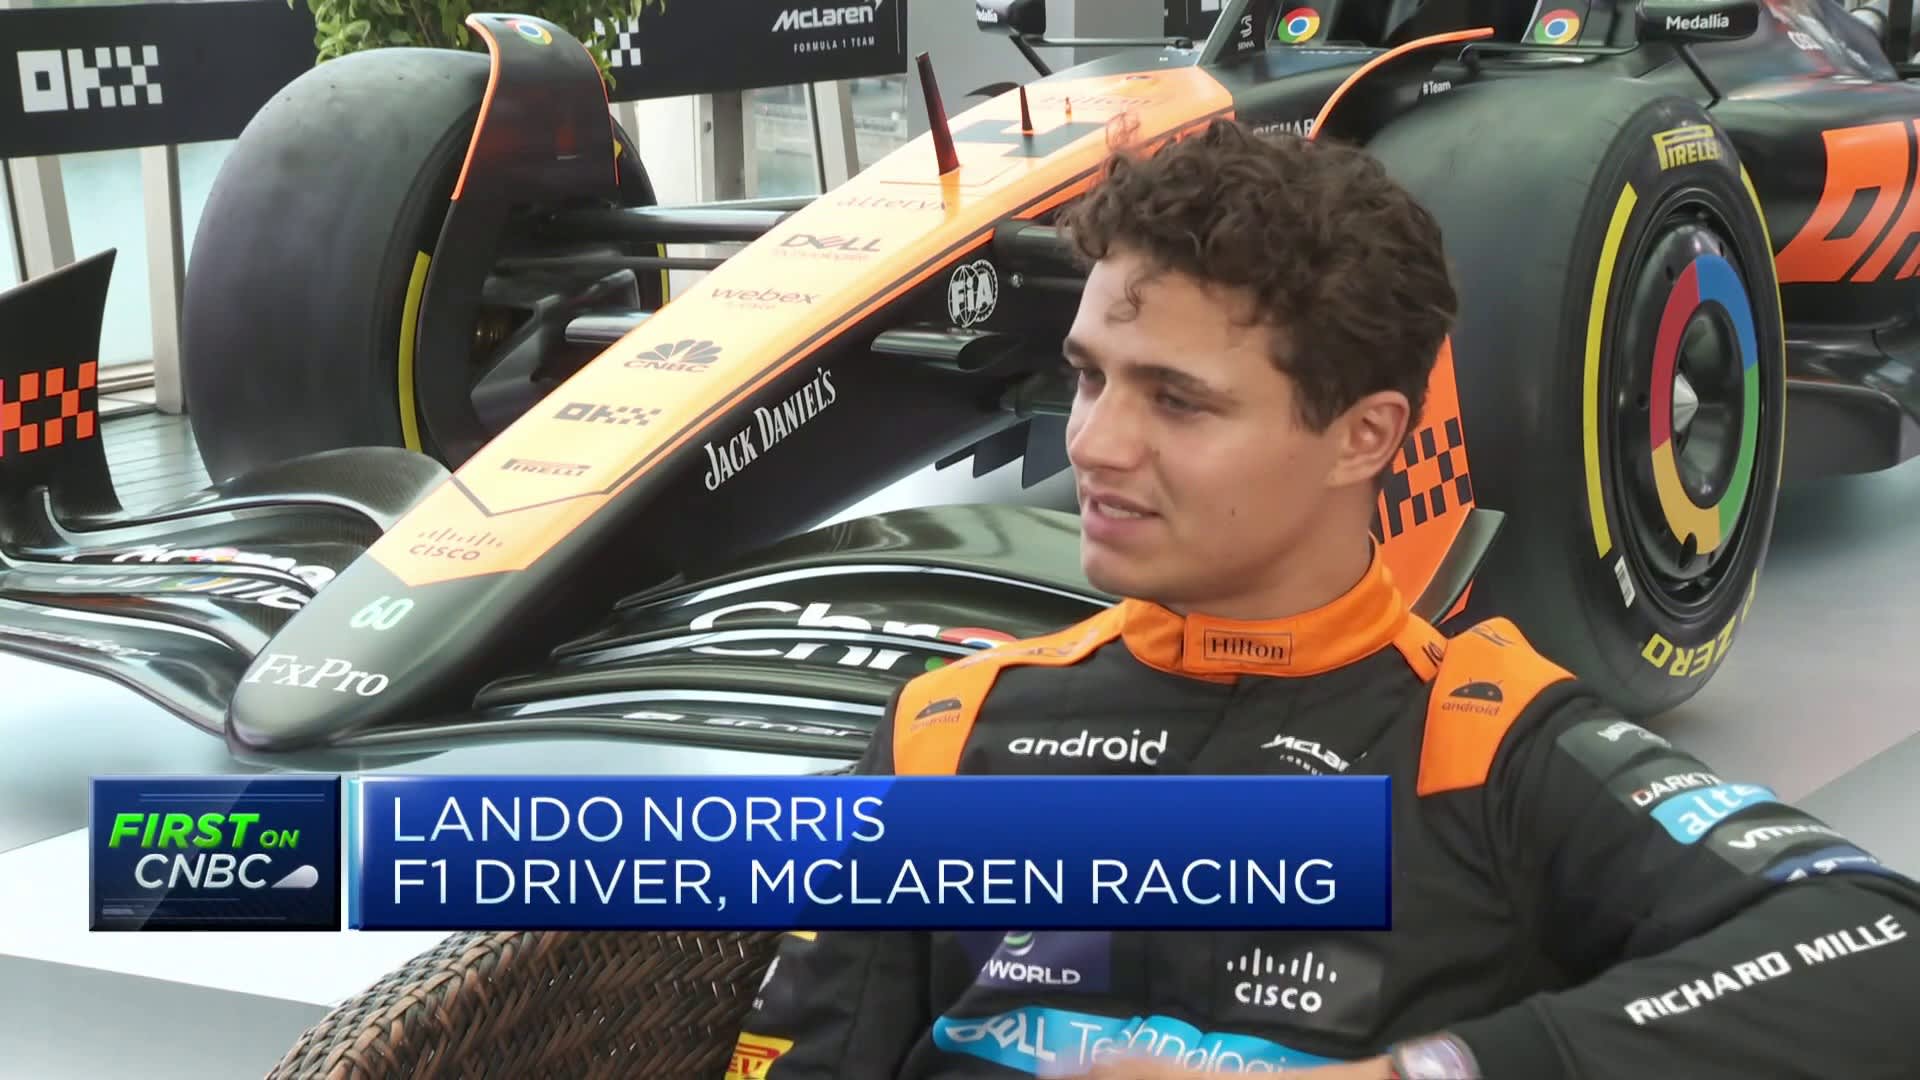 Bumpy, hot and dusty: McLaren’s Lando Norris on F1 in Singapore